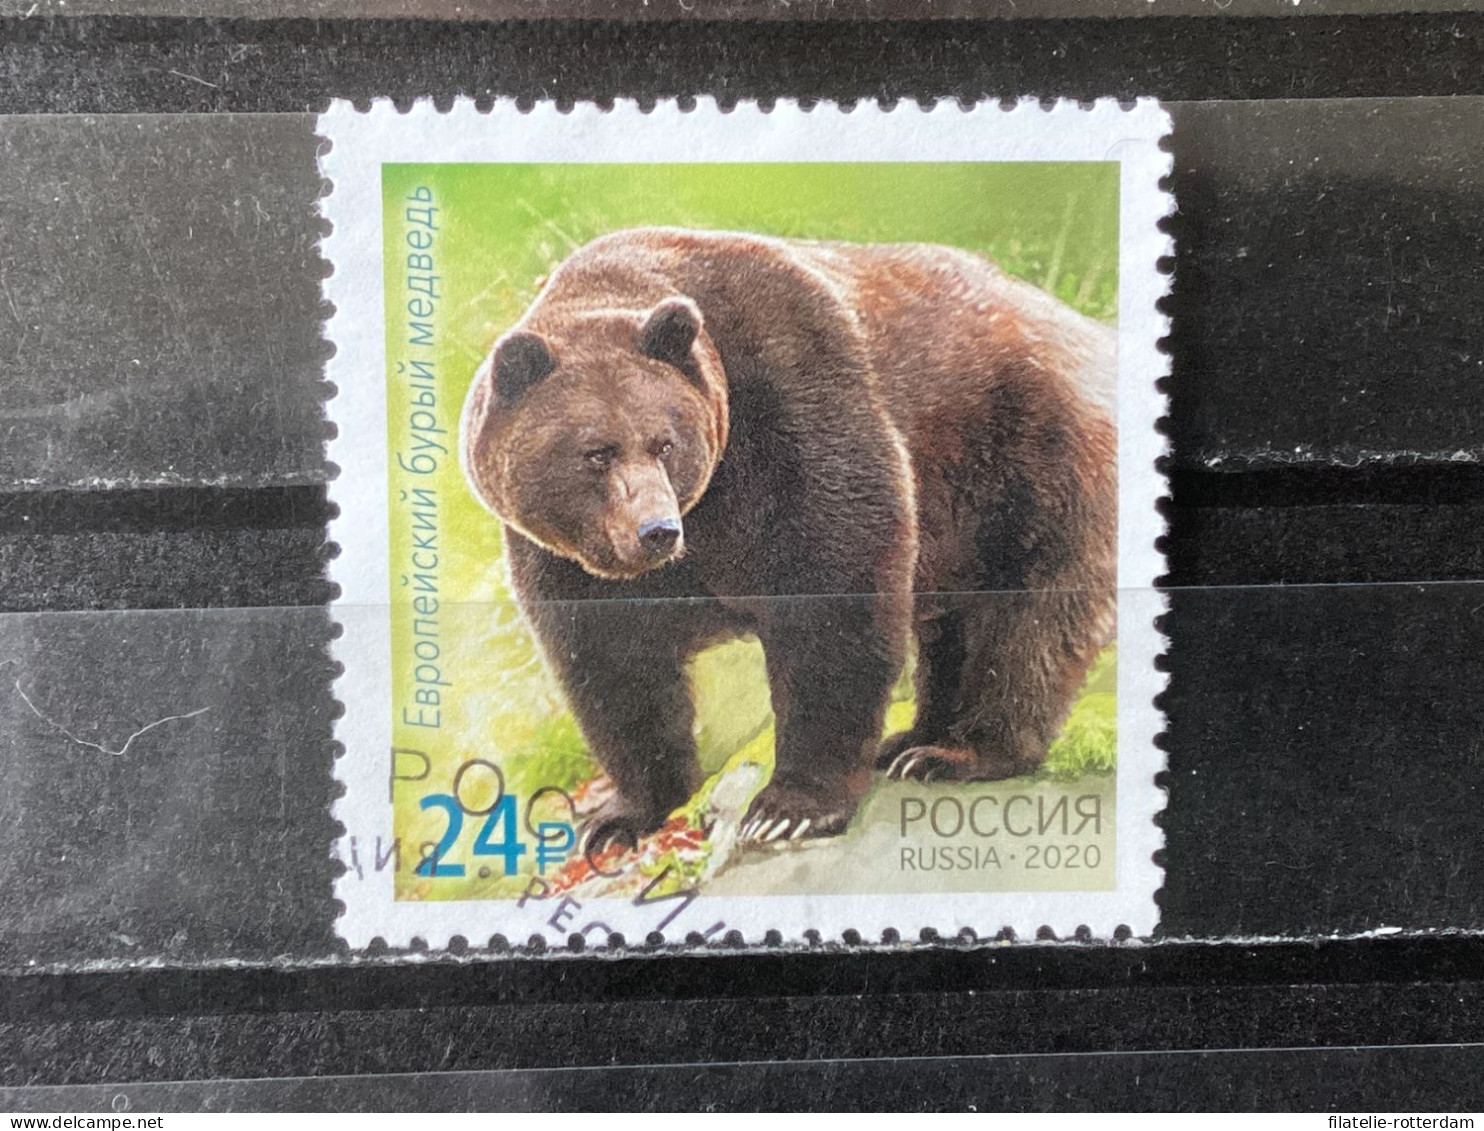 Russia / Rusland - Bears (24) 2020 - Used Stamps